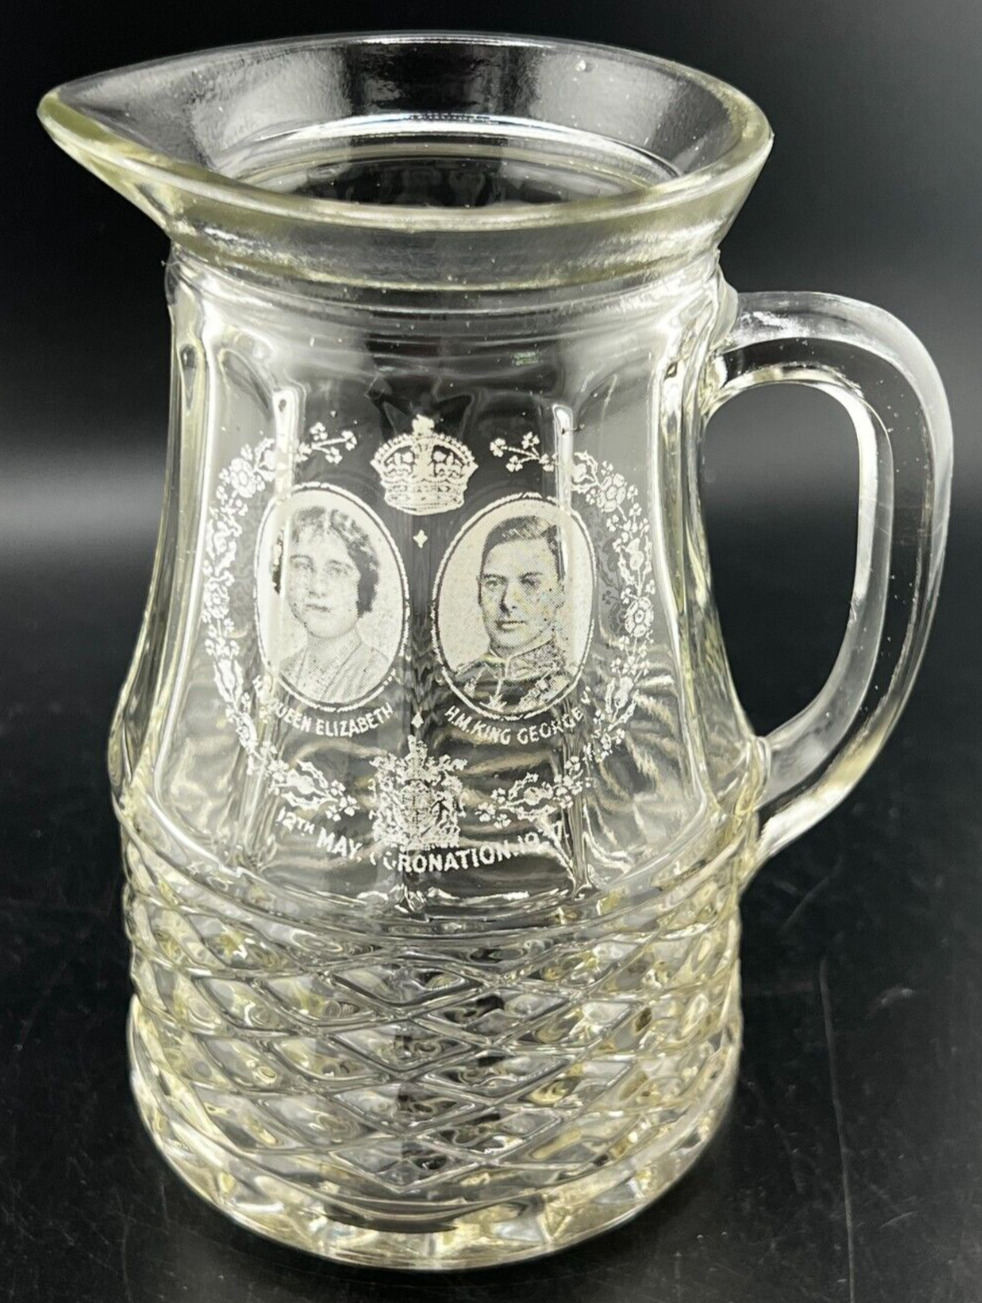 KING GEORGE VI QUEEN ELIZABETH 1937 PRESSED GLASS SMALL PITCHER